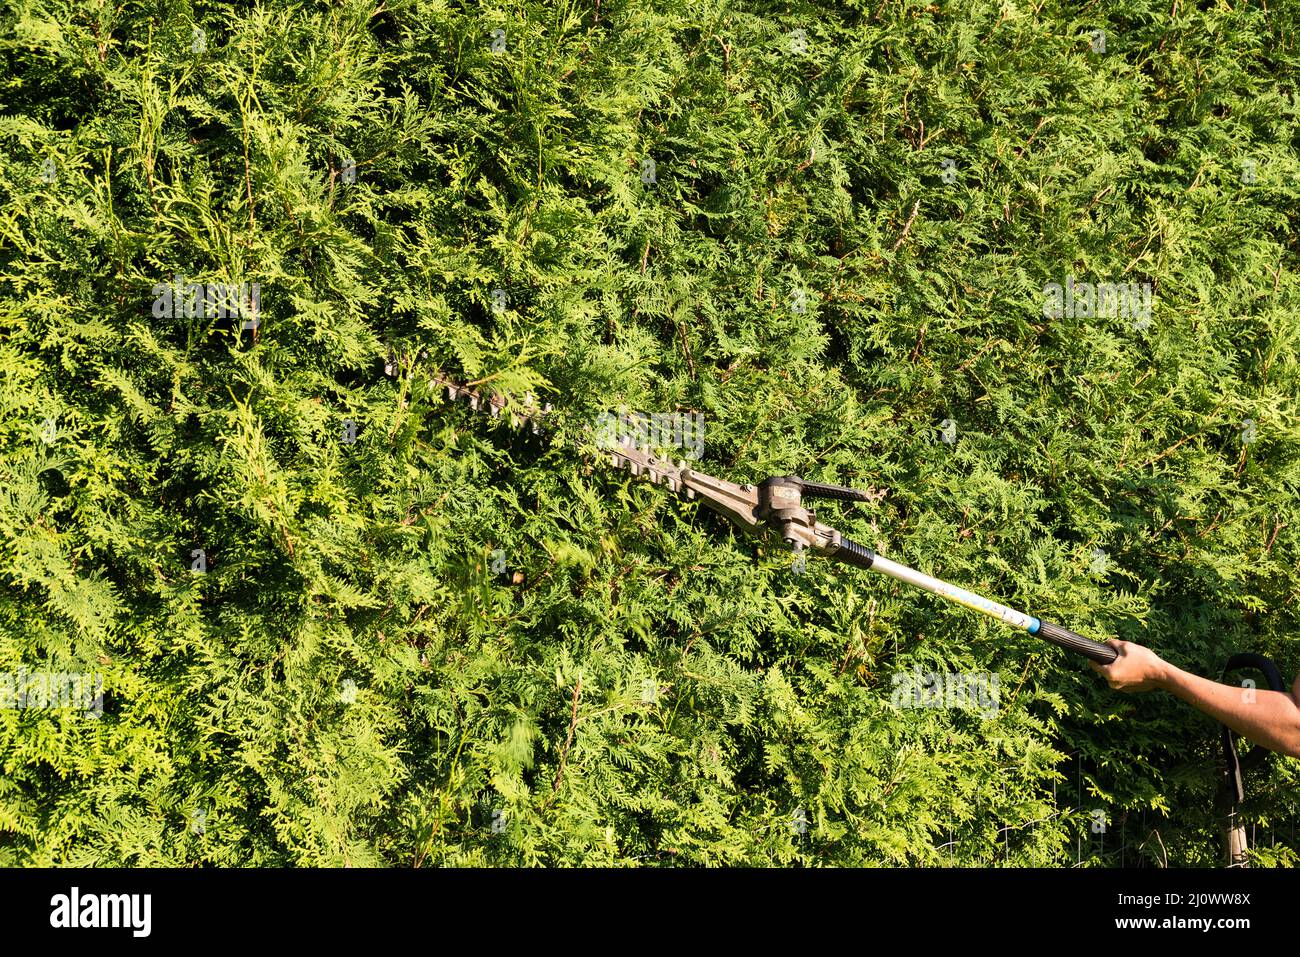 Gardener trimming hedges with pole shears - hedge trimmer Stock Photo